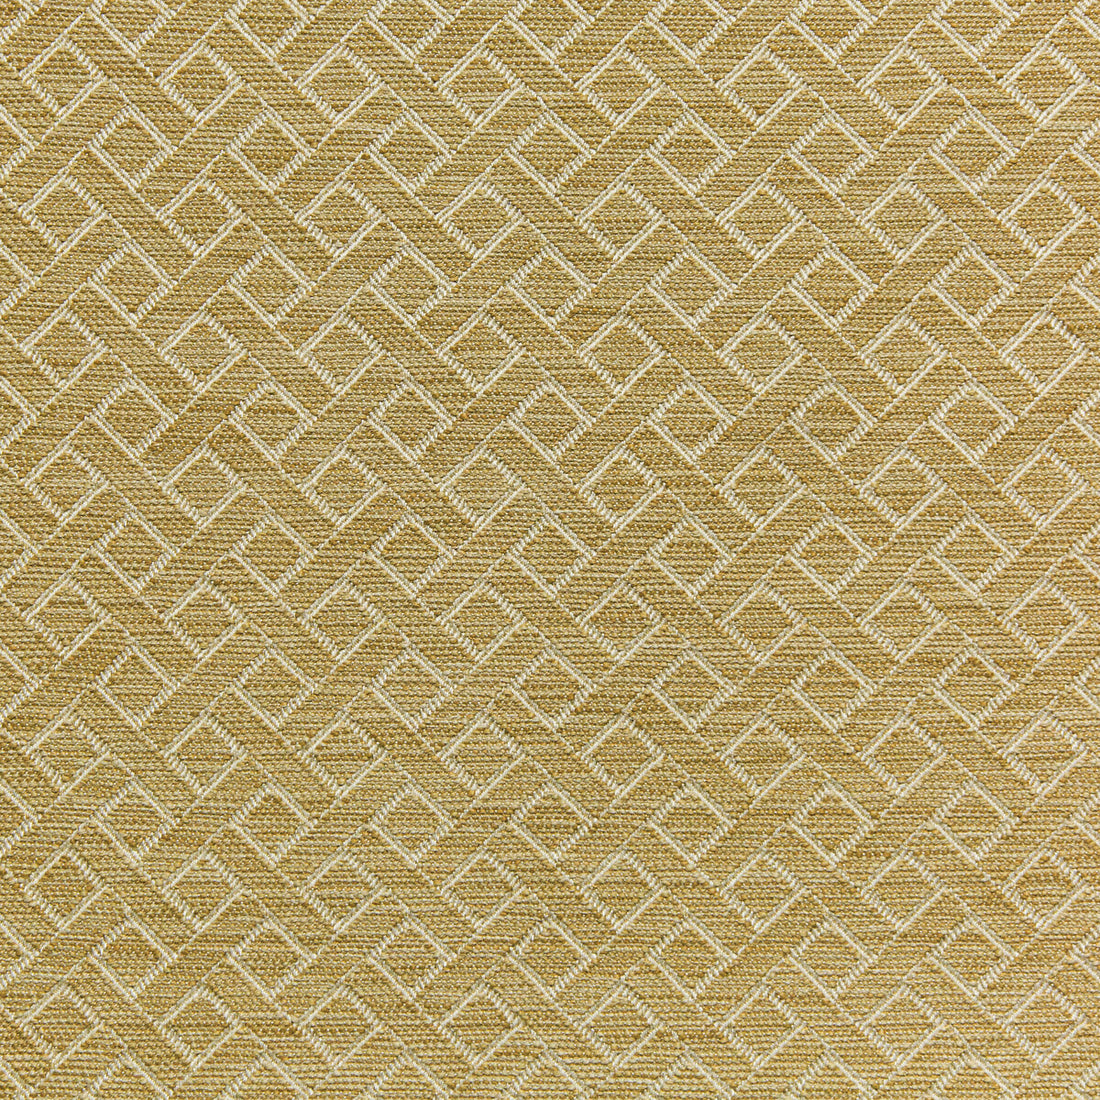 Maldon Weave fabric in straw color - pattern 2020102.164.0 - by Lee Jofa in the Linford Weaves collection